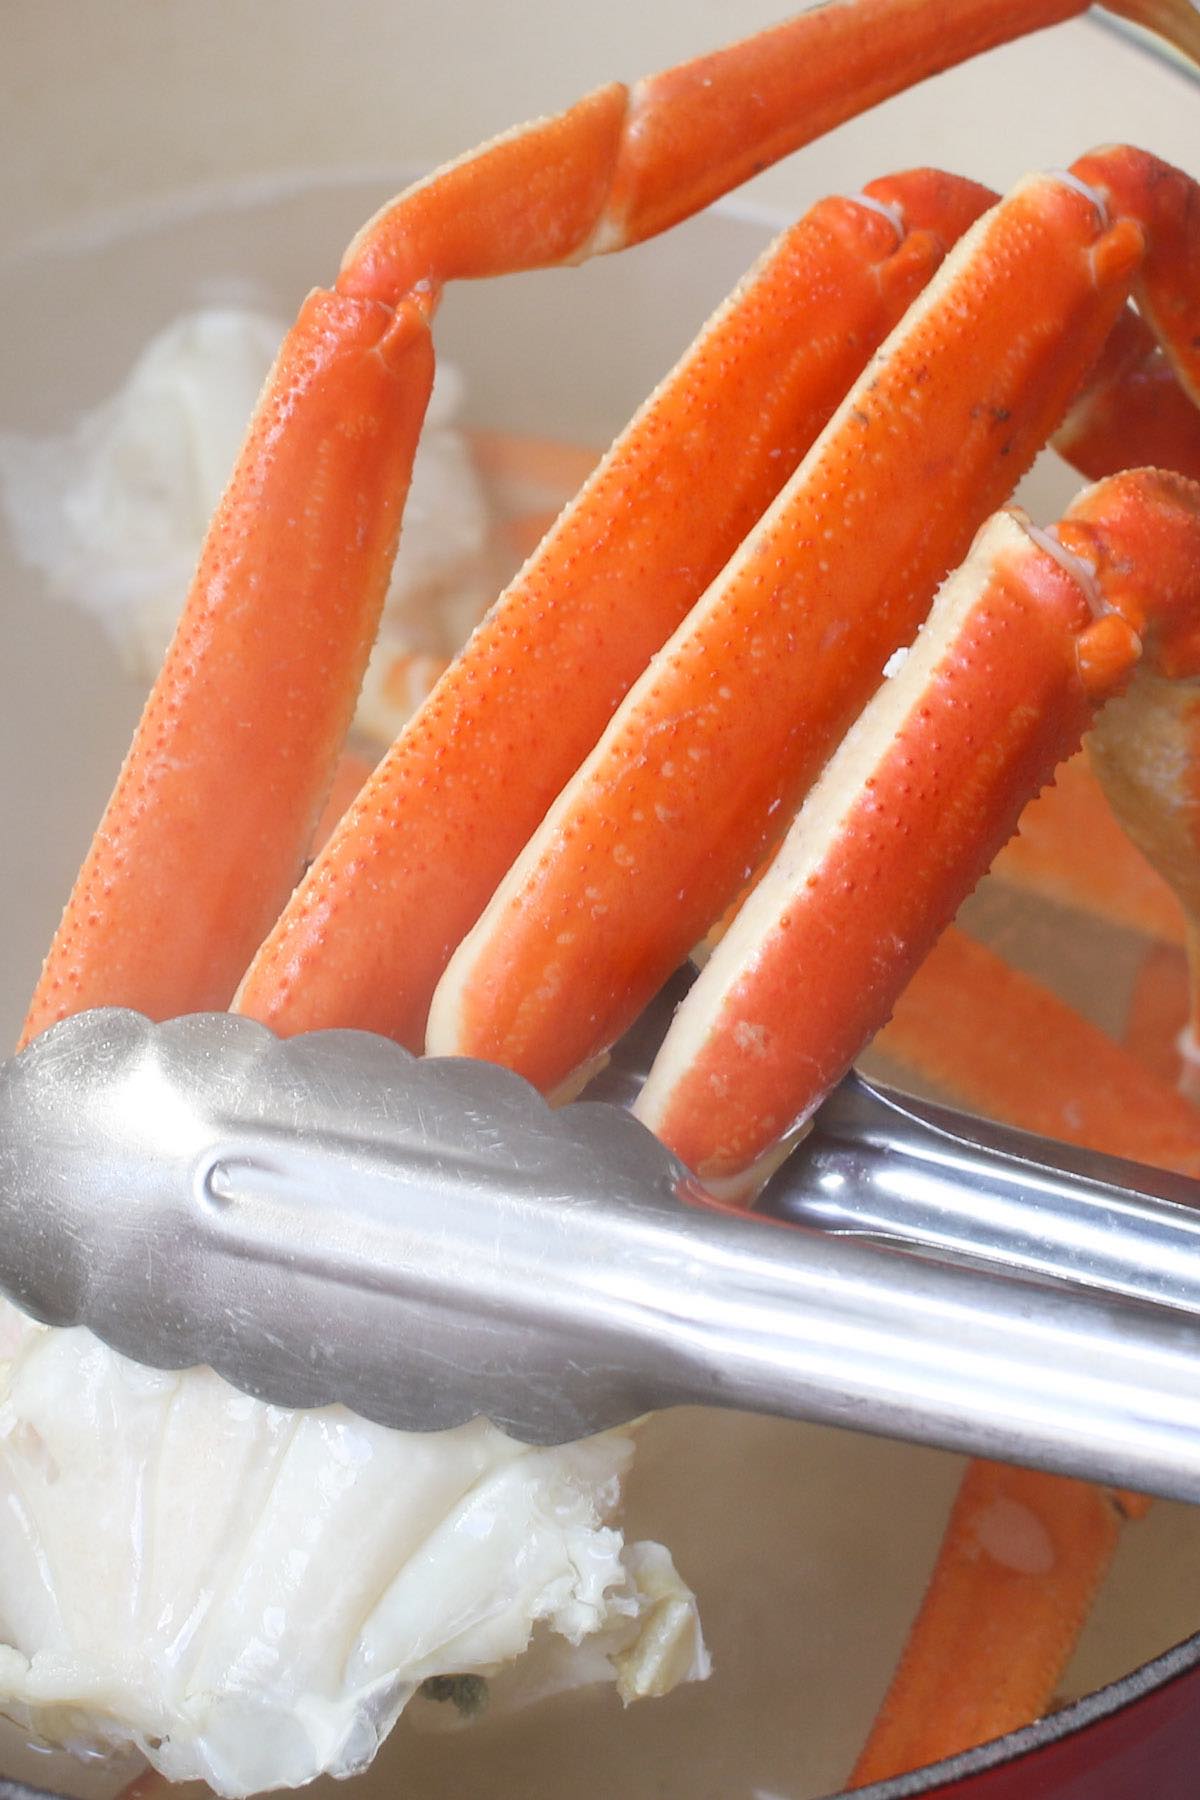 Treat your guests to these succulent Snow Crab Legs seasoned with Old Bay seasoning. They’re incredibly easy to make and ready to eat in just 10 minutes!